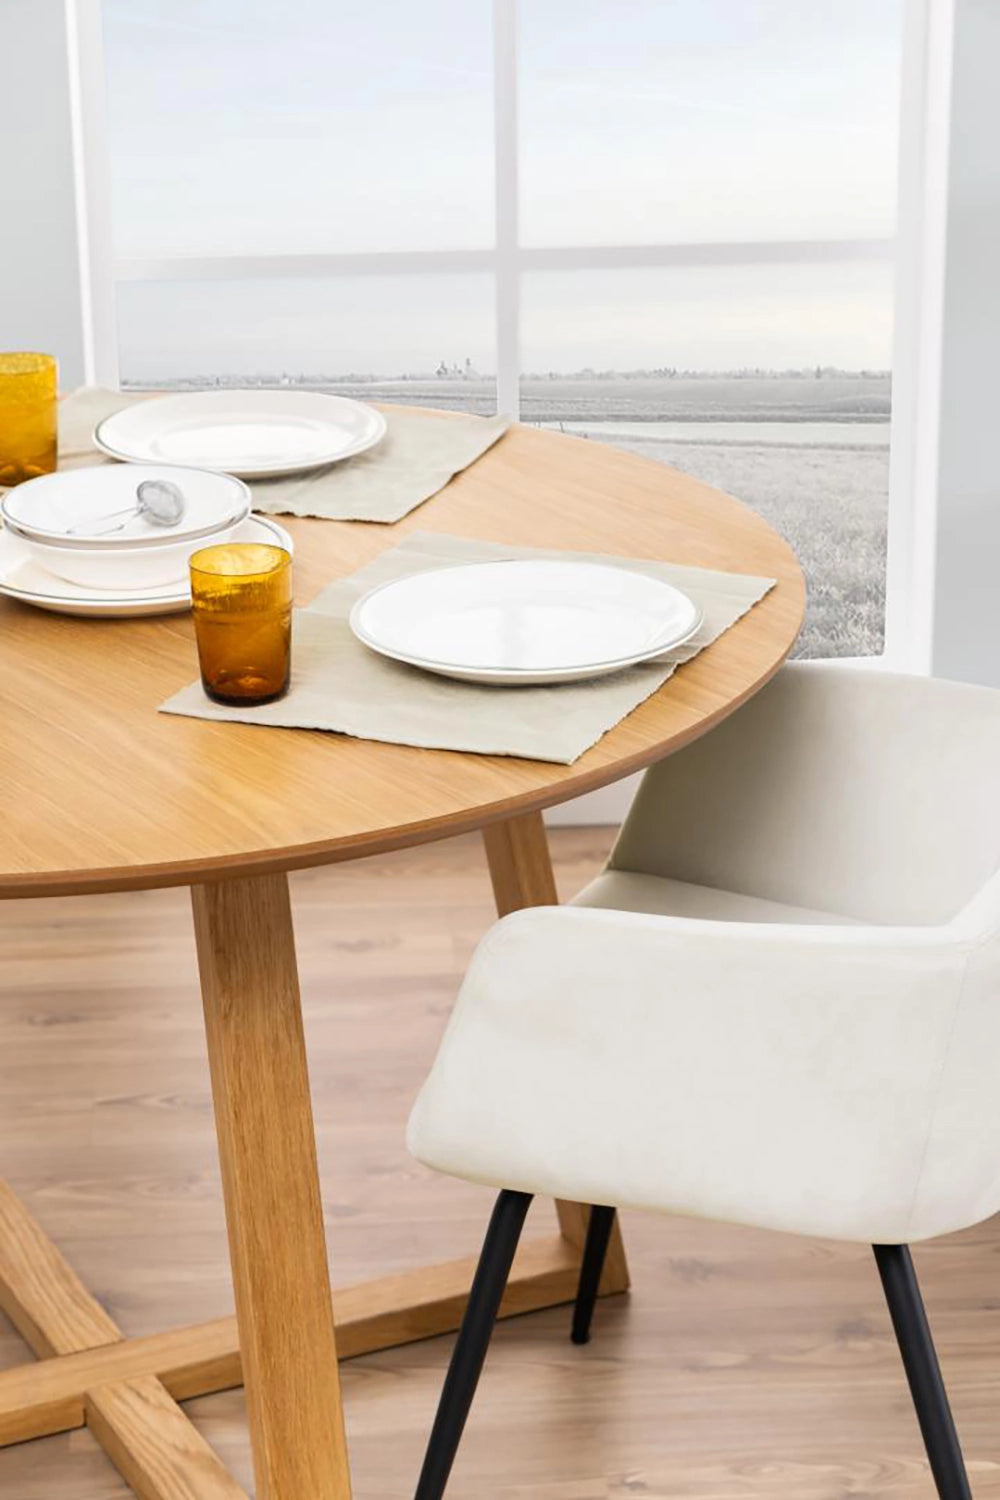 Court Round Dining Table in Oak Finish with White Upholstered Chair and Plate in Dining Setting